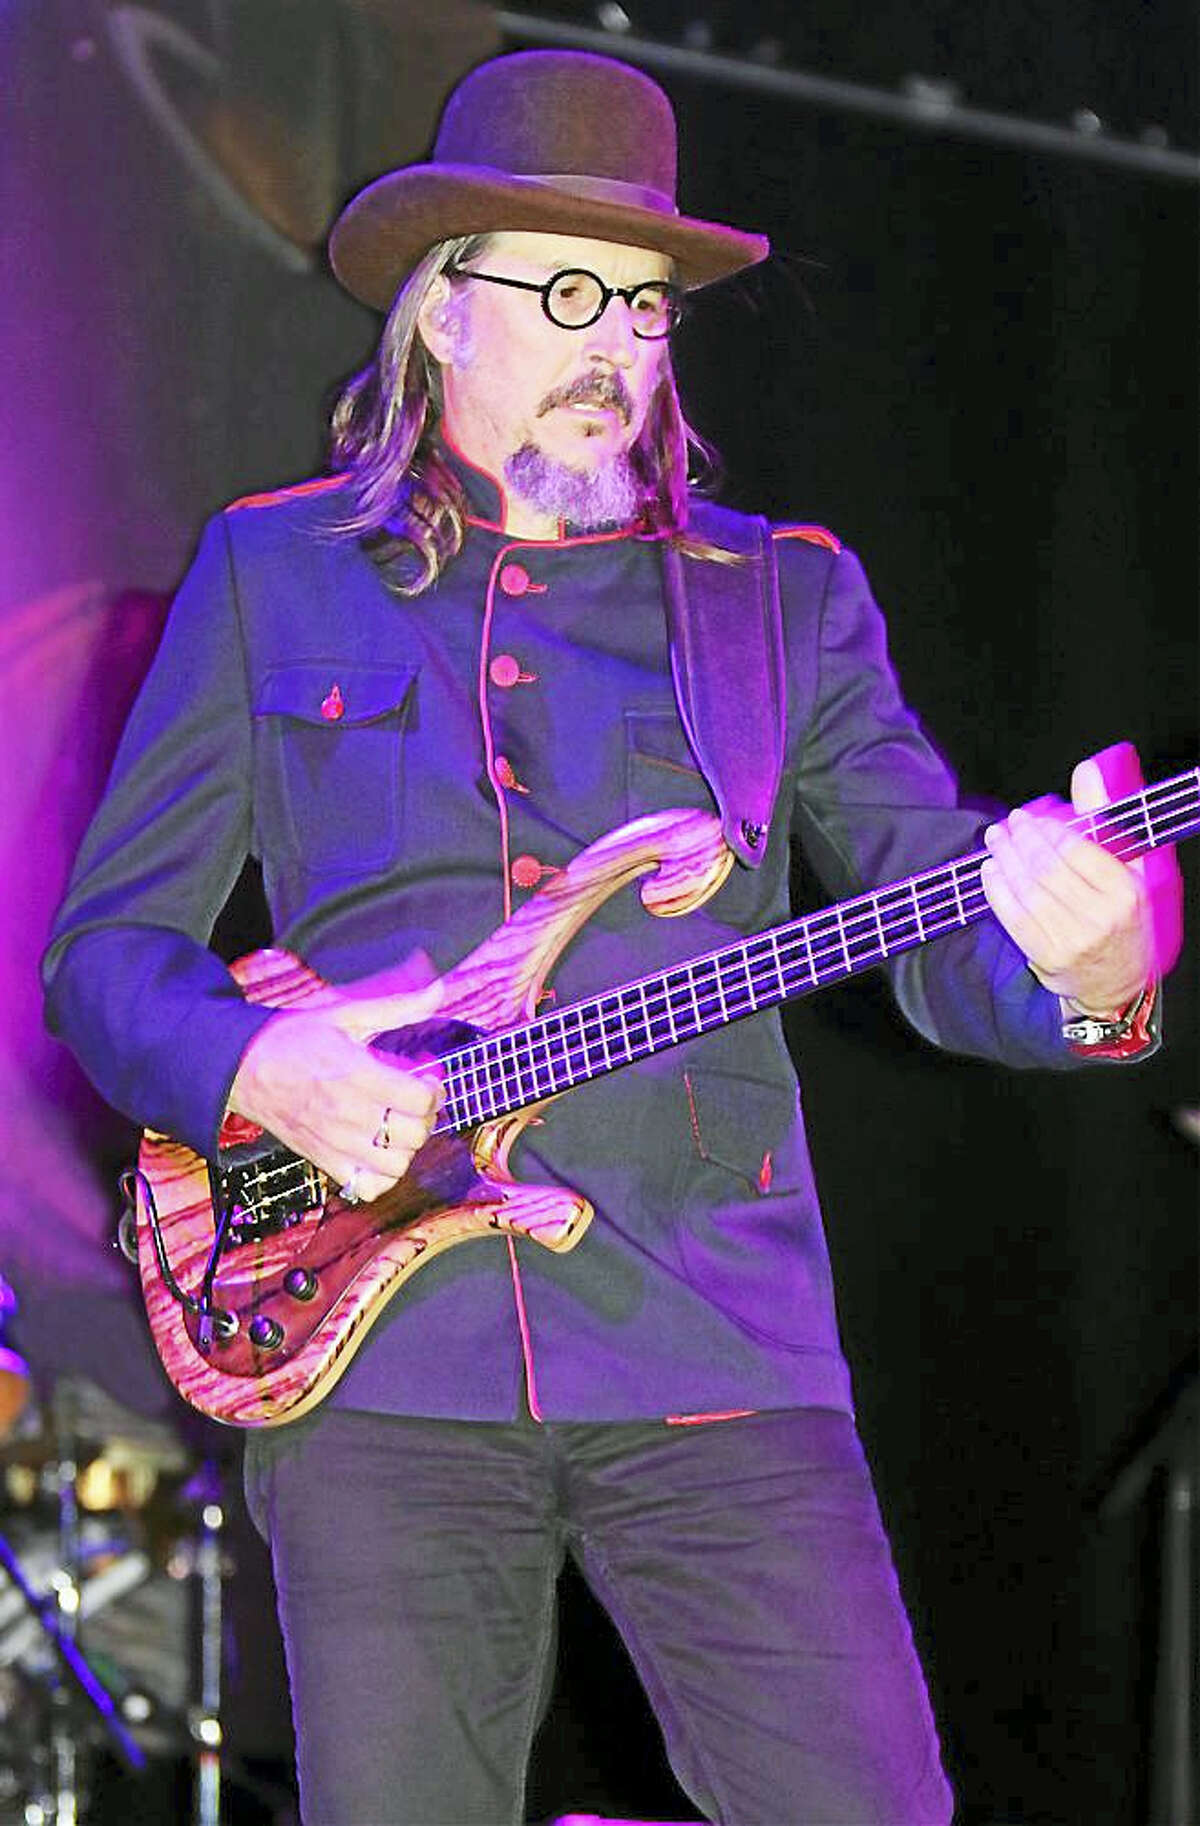 Photo by John AtashianBass player, singer and songwriter Les Claypool, of the rock band Primus, performs at the College Street Music Hall in New Haven Aug. 26 with his latest band, the Claypool Lennon Delirium. The new group, which also includes musician Sean Lennon, are now on a U.S. tour in support of their new CD, The Monolith of Phobos. To learn more about this new group, visit www.theclaypoollennondelirium.com.